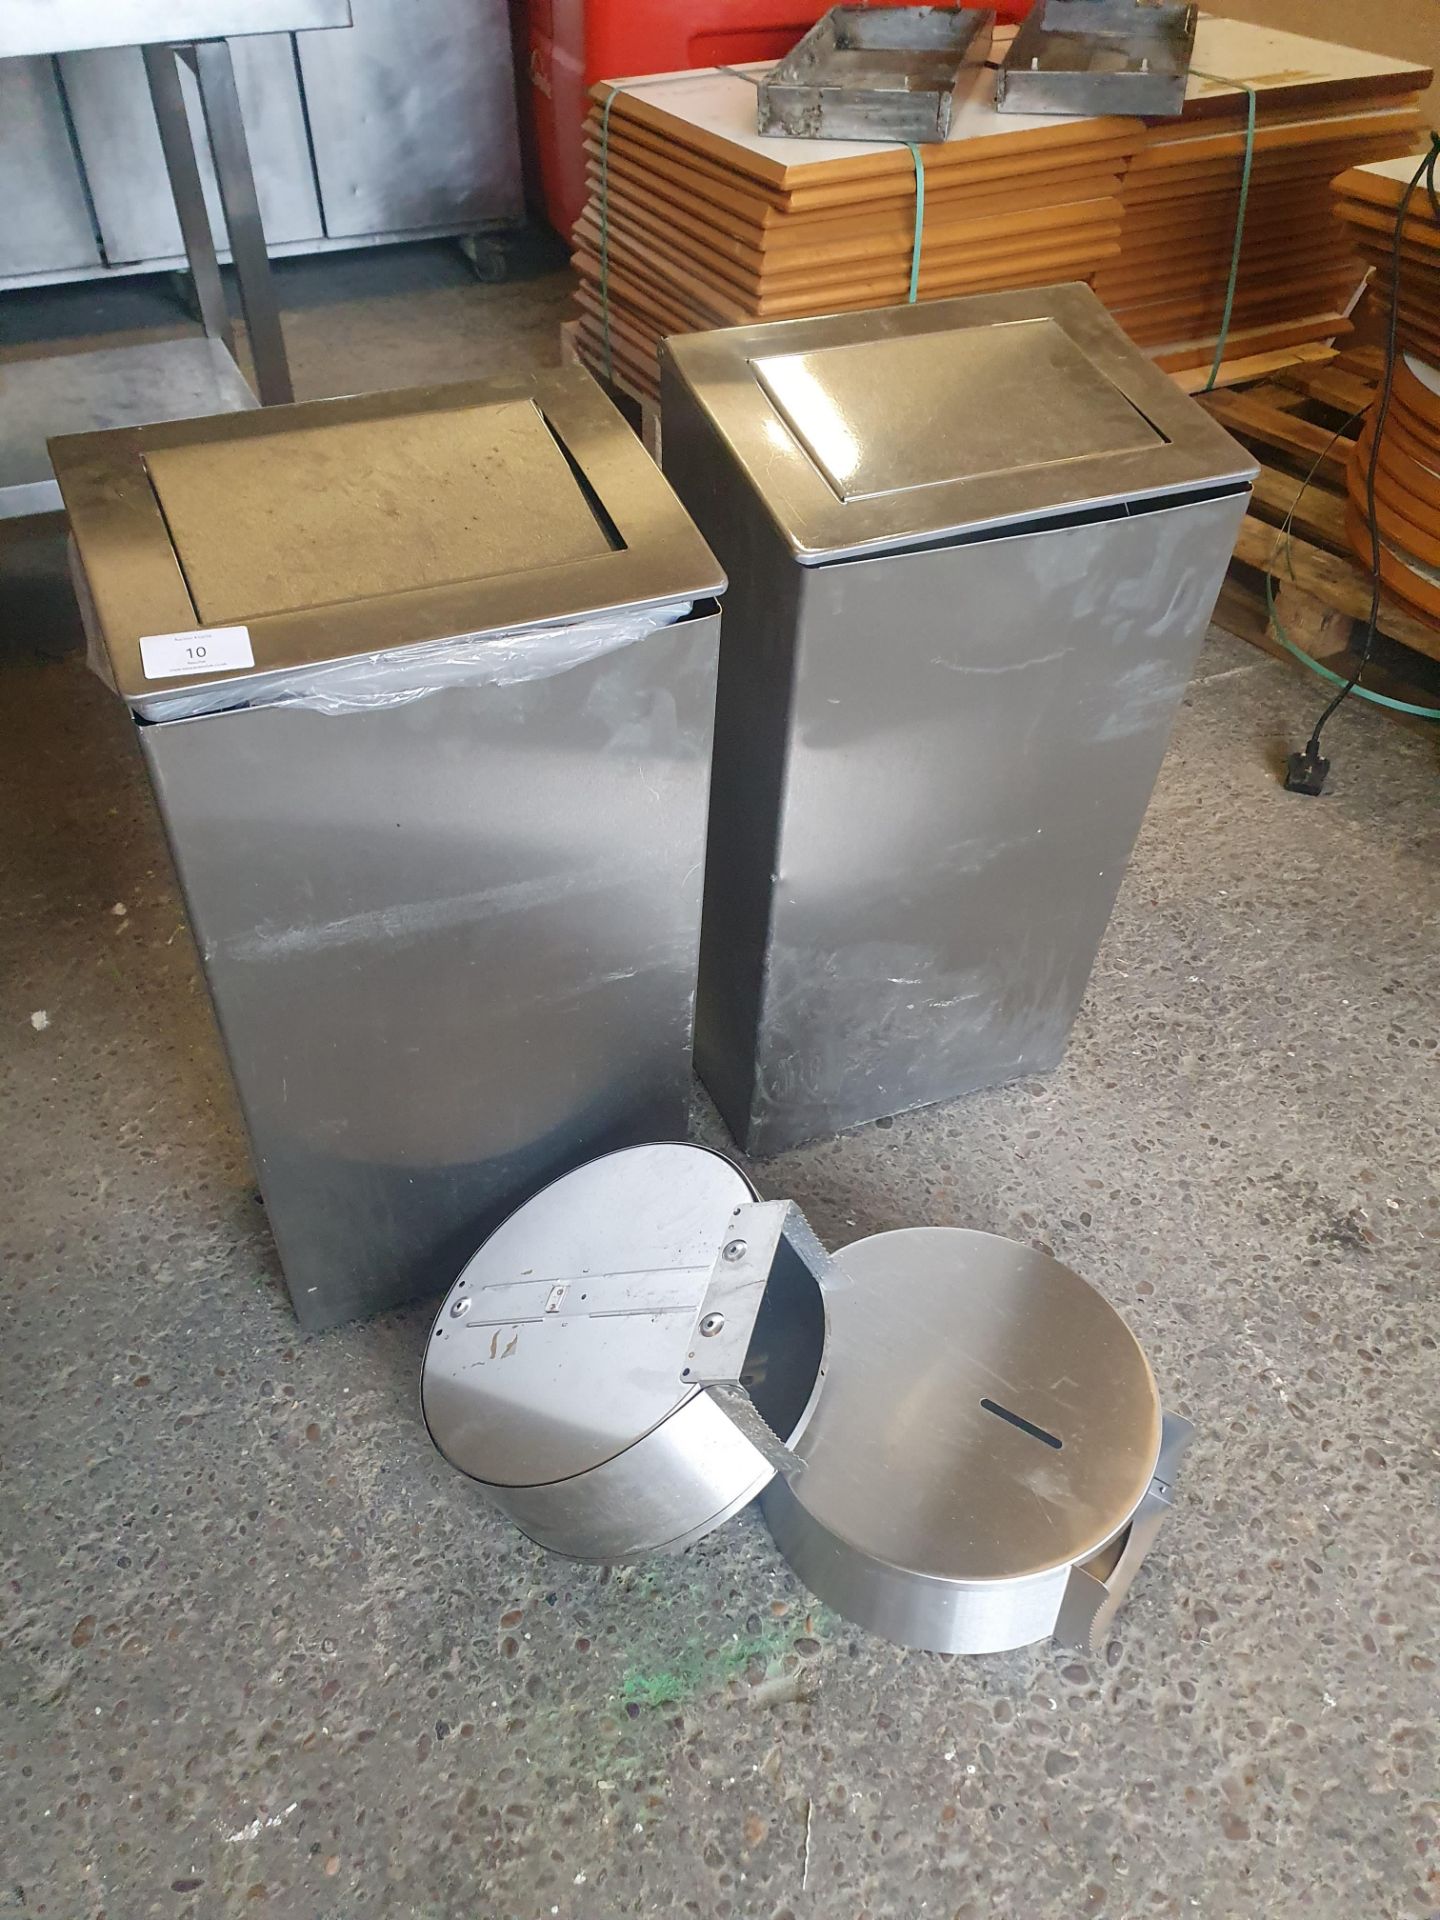 2 x S/S Bins and Roll Dispensers